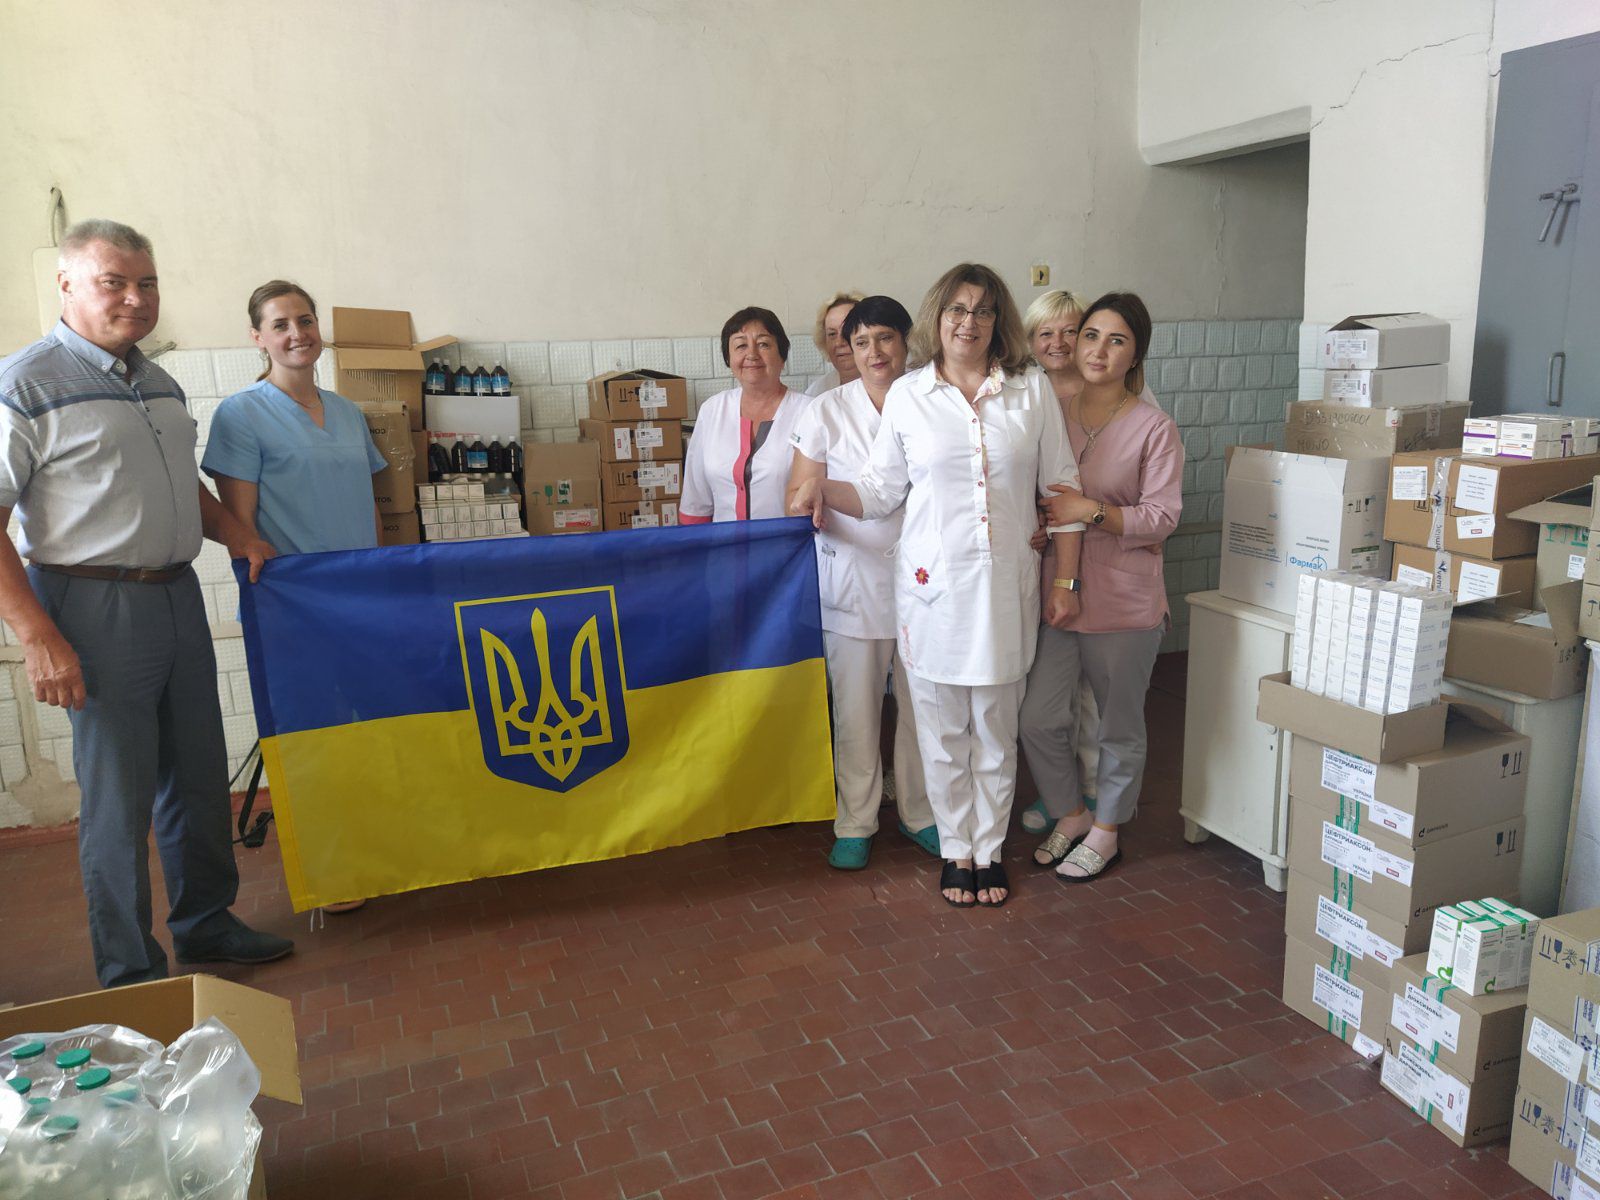 Japan supports Ukrainian hospitals in times of crisis